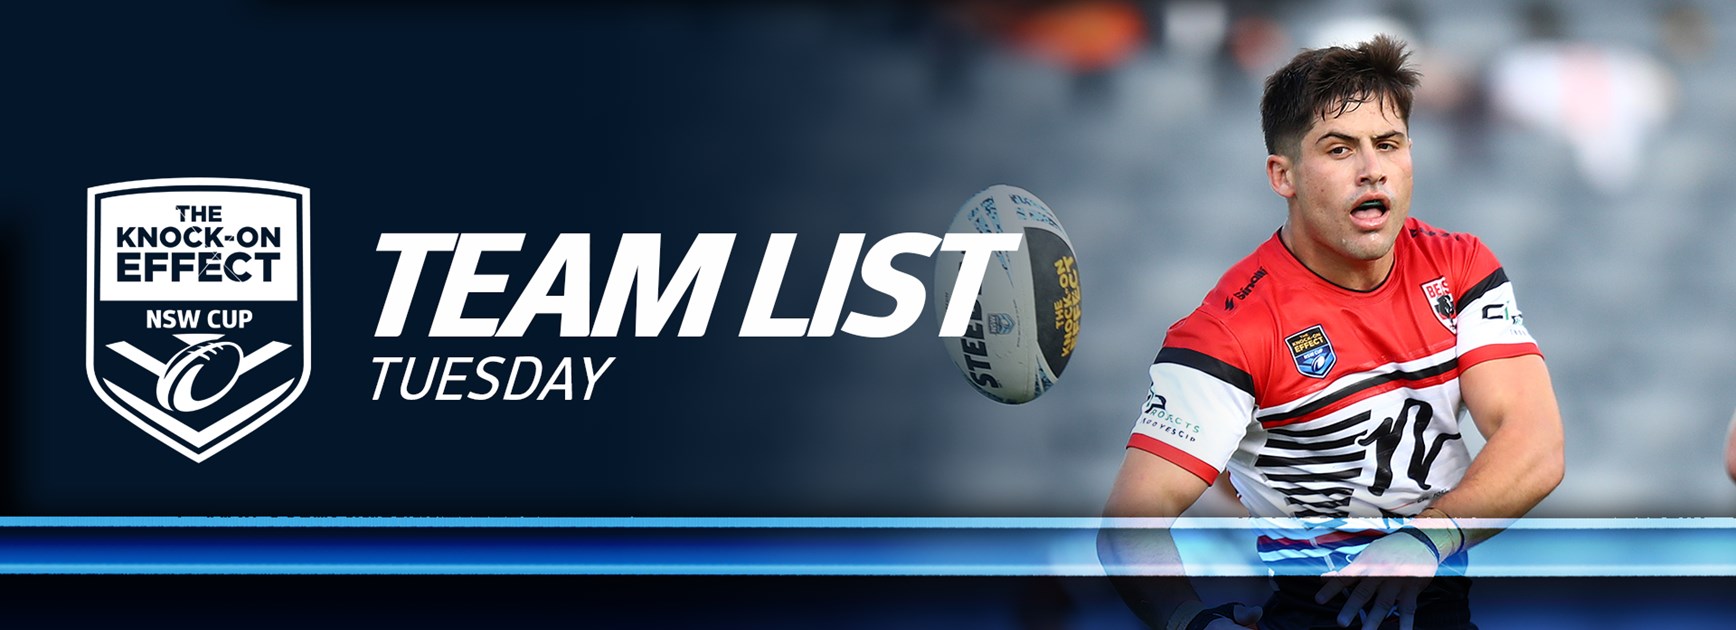 Team List Tuesday | The Knock-On Effect NSW Cup - Round Nine